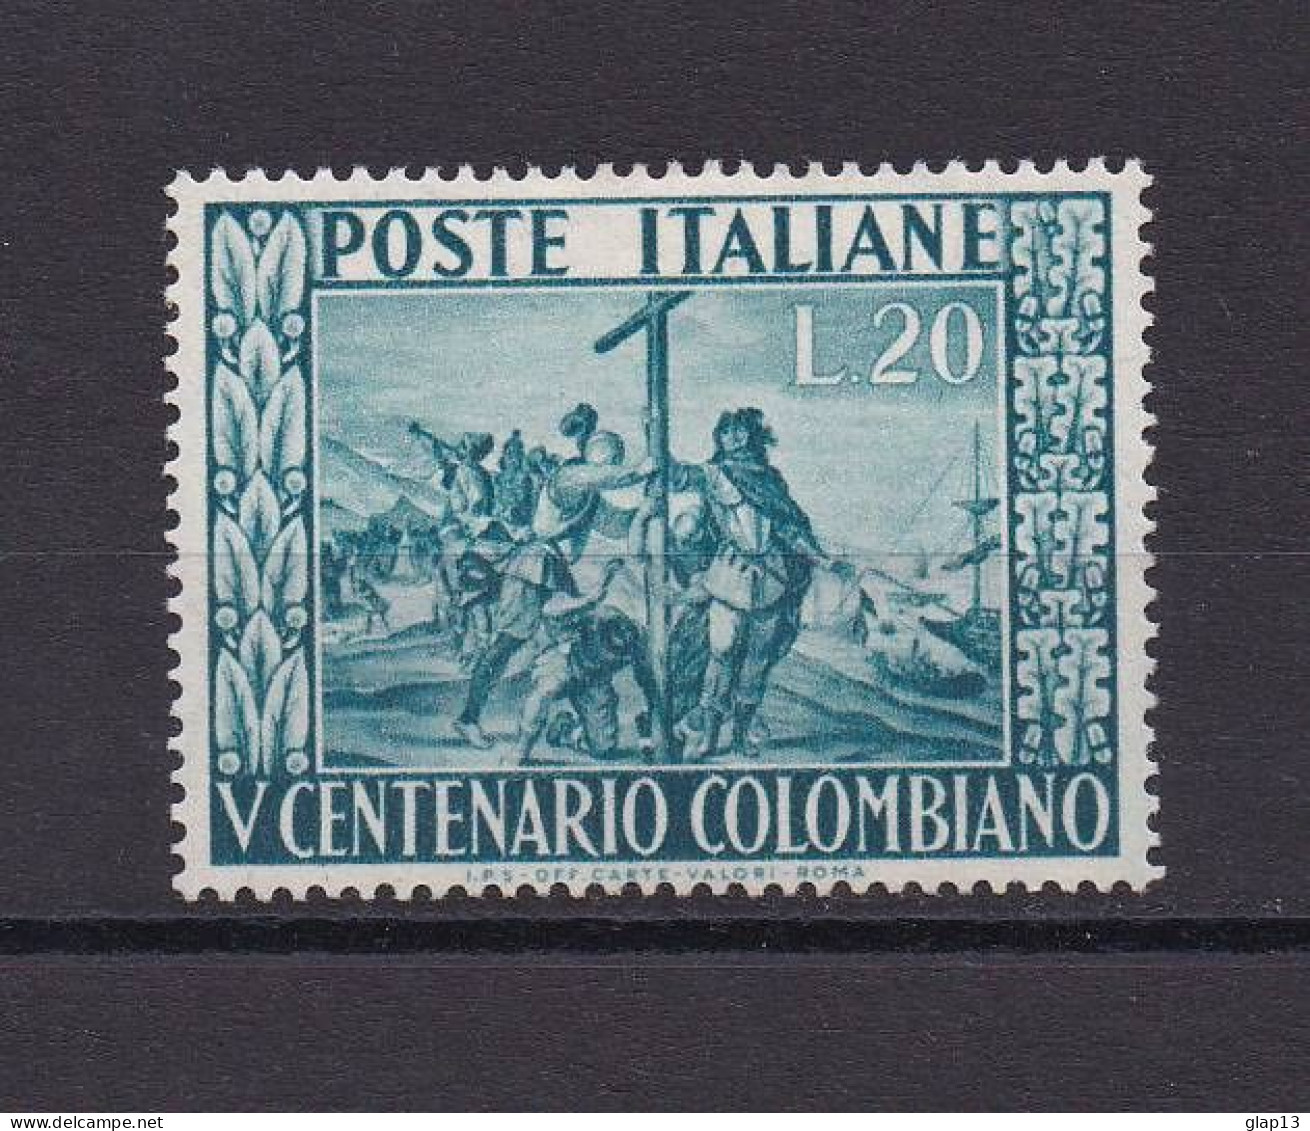 ITALIE 1951 TIMBRE N°597 NEUF AVEC CHARNIERE CHRISTOPHE COLOMB - 1946-60: Neufs